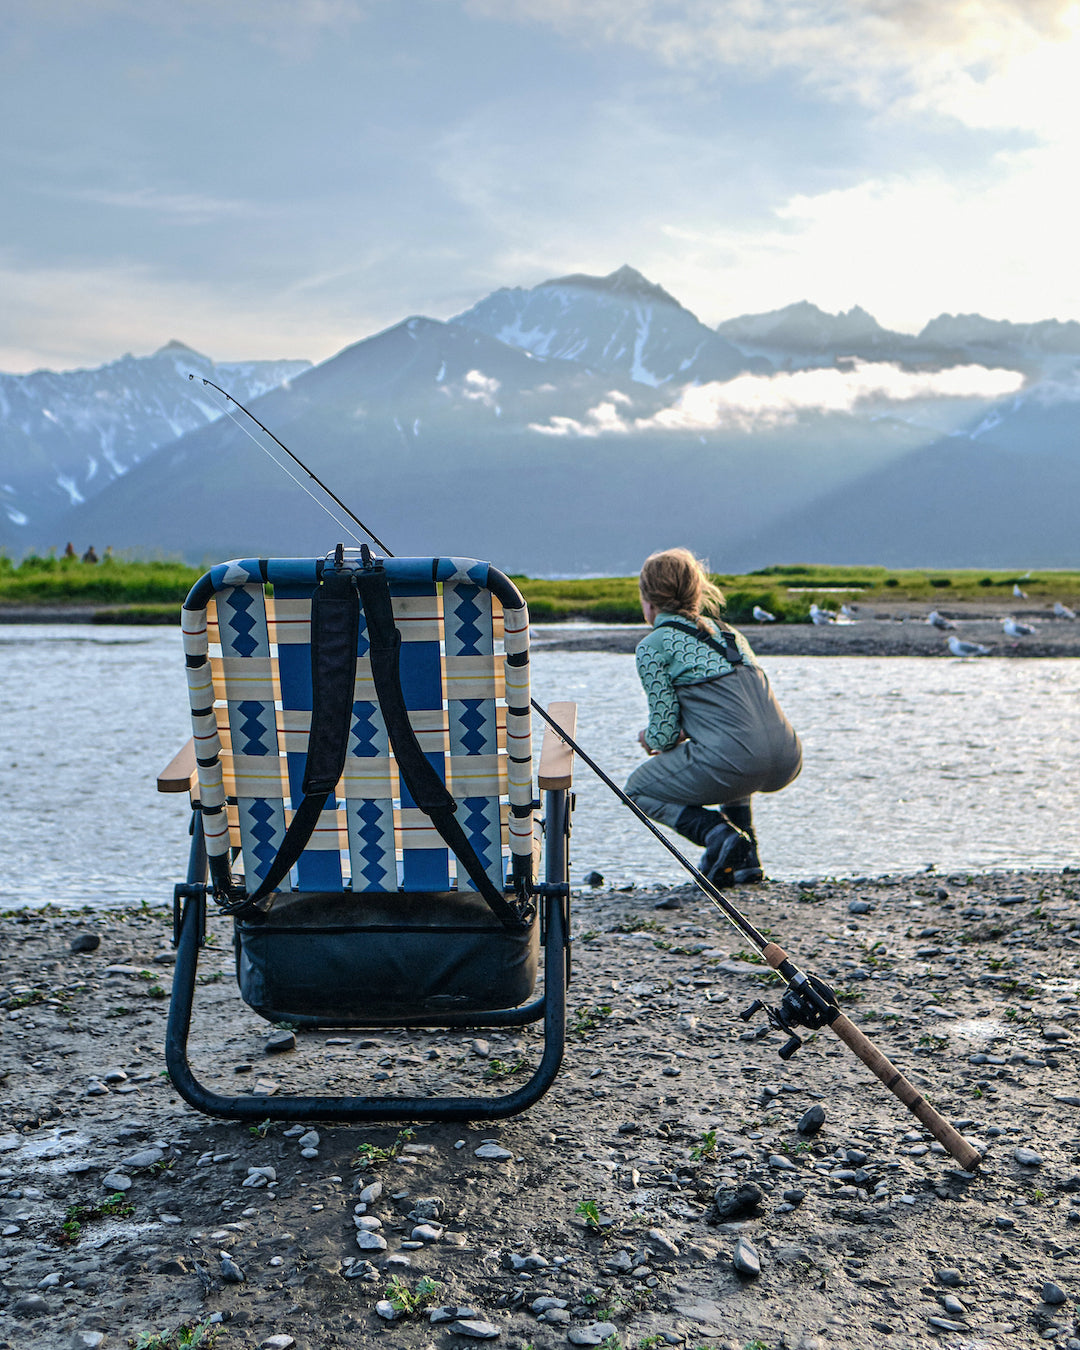 A woman fishing in Alaska with the PARKIT Voyager outdoor chair sitting on the river bank which holds all of her fishing supplies in the attachable cooler.